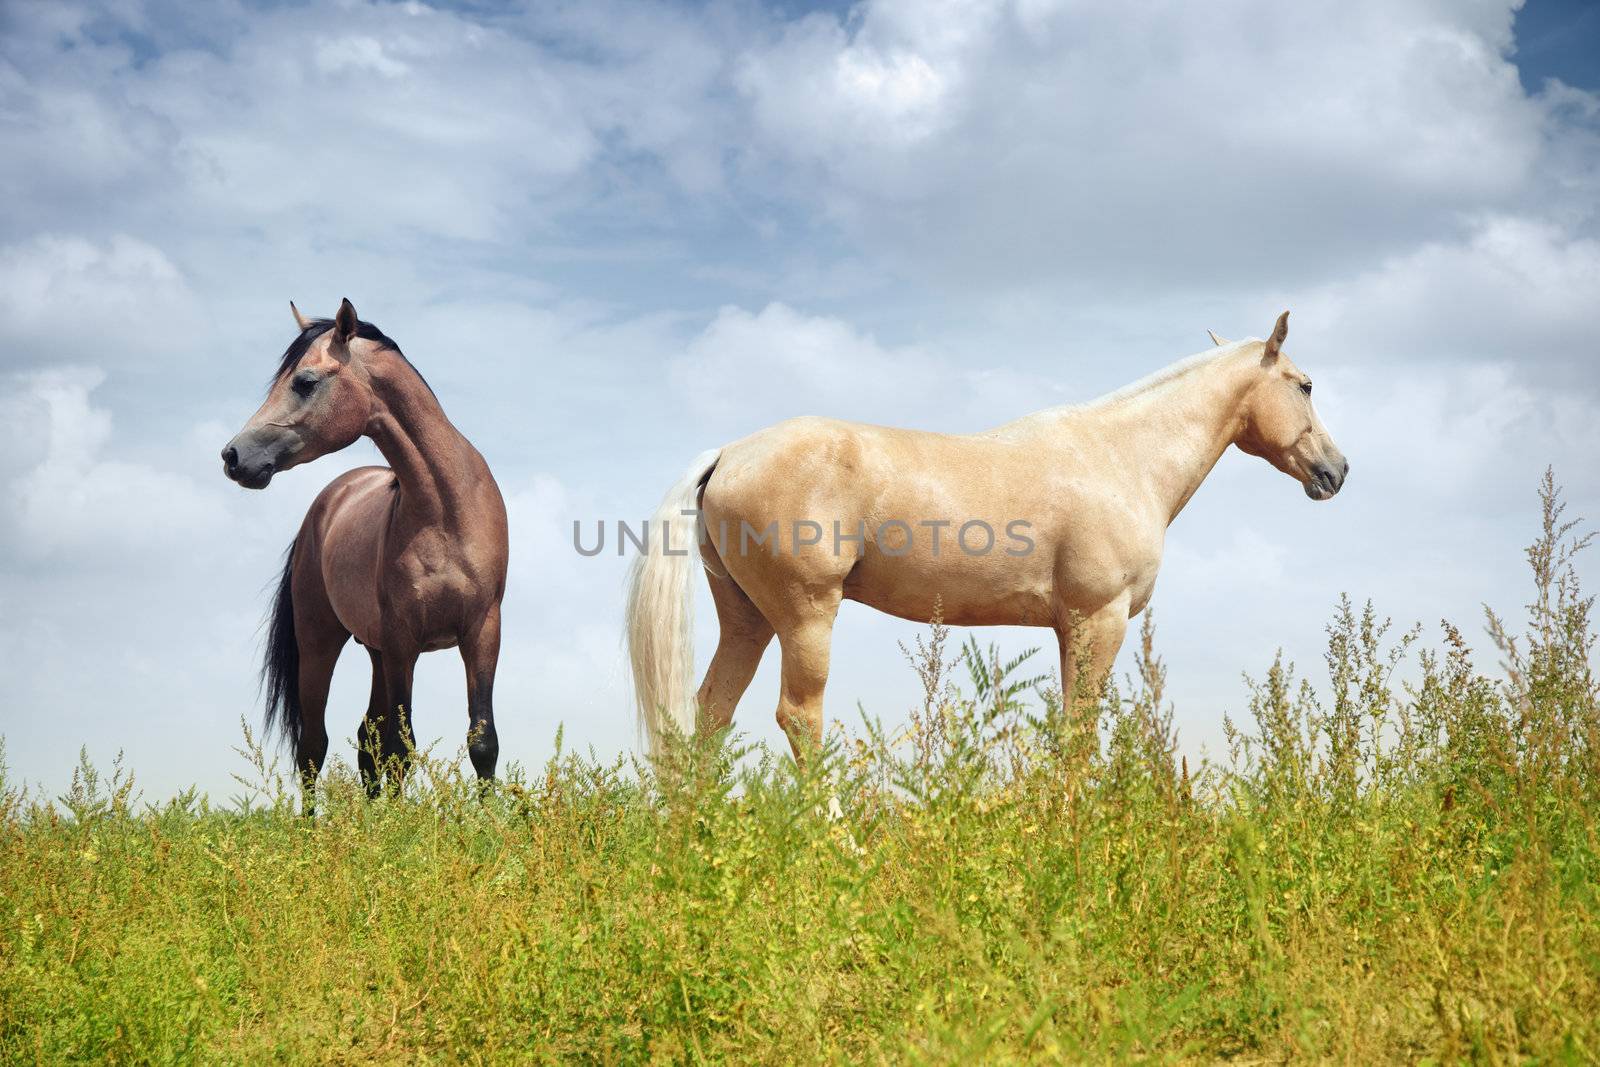 Two horses in the steppe. Colorful horizontal photo. Natural light and shadows